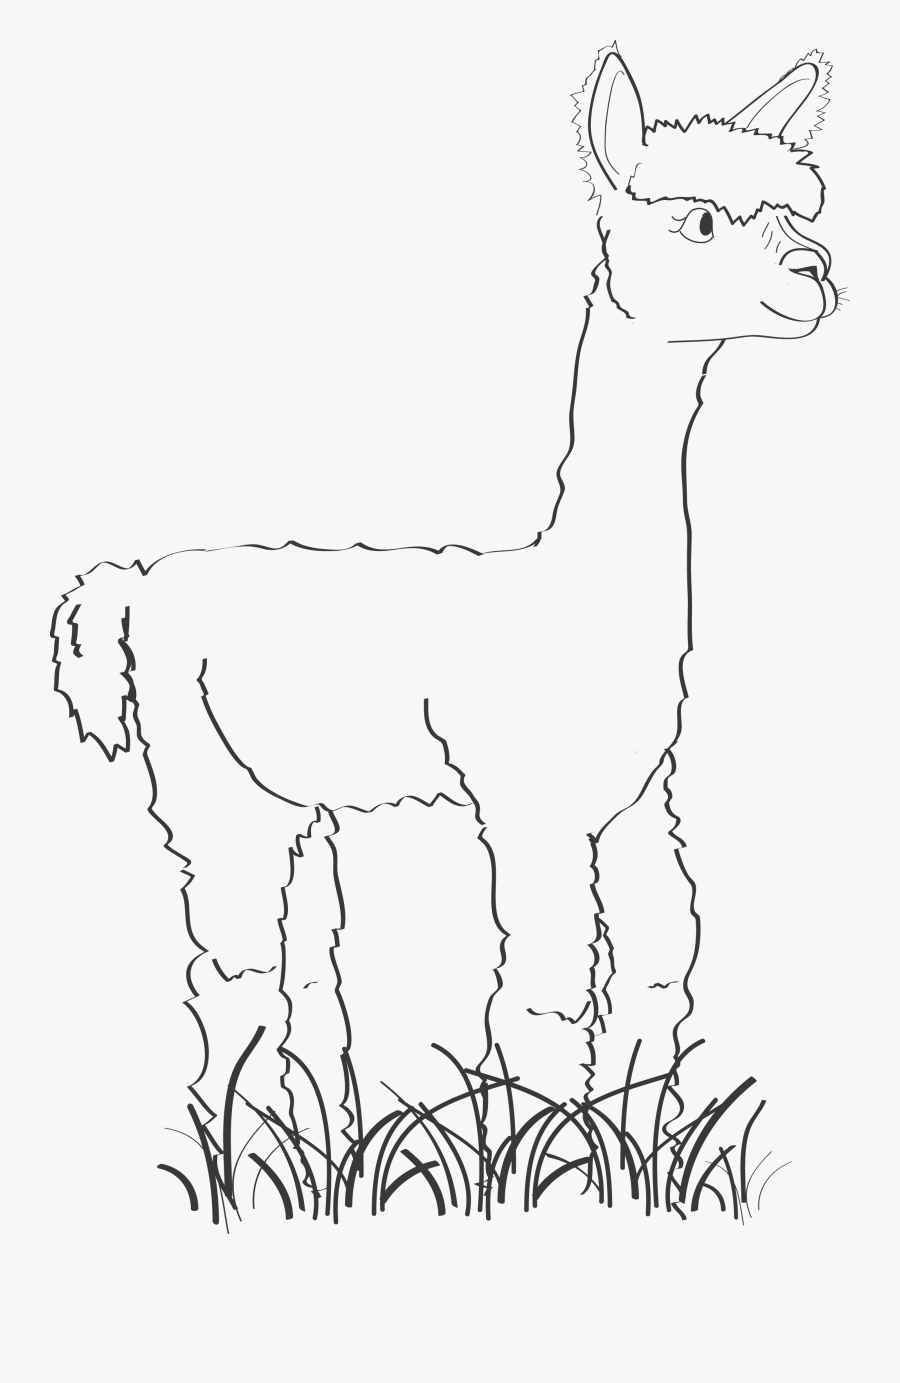 Other Ways To Help Our Alpacas Poundsforpacas - Llama Drawings Cliparts, Transparent Clipart